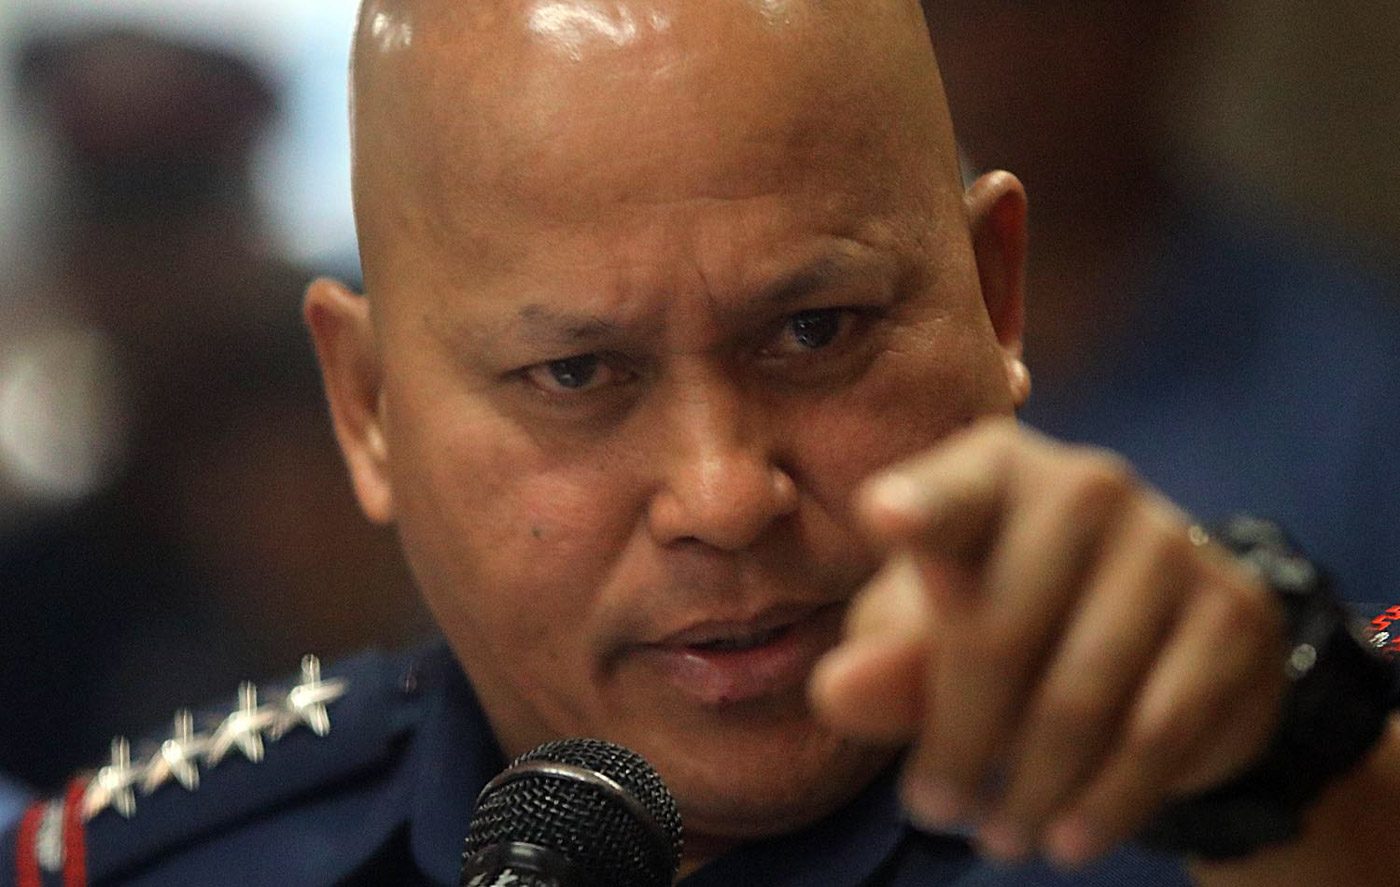 LAST SAY. PNP chief Police Director General Ronald Dela Rosa at a press conference in Camp Crame on Monday, January 22, 2018. File Photo by Darren Langit/Rappler   